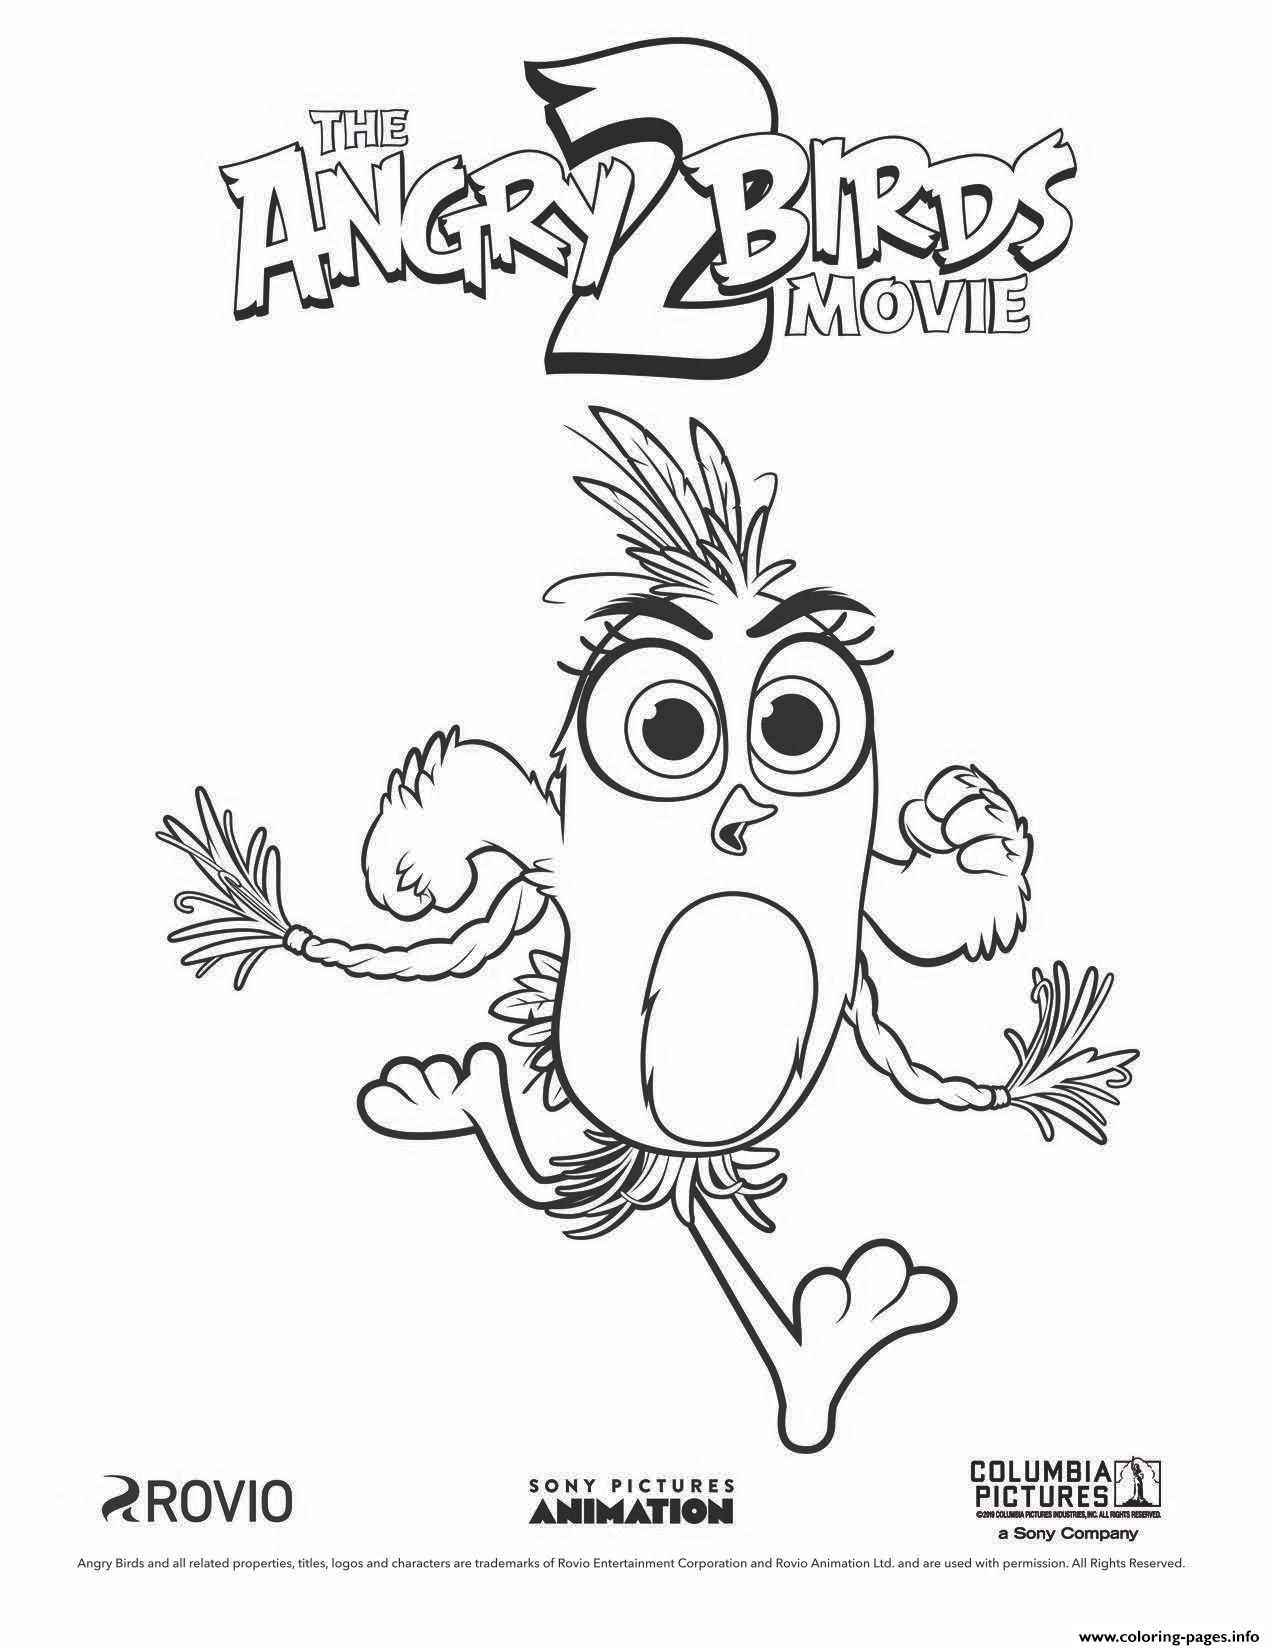 Angry Birds 2 Movie Silver coloring